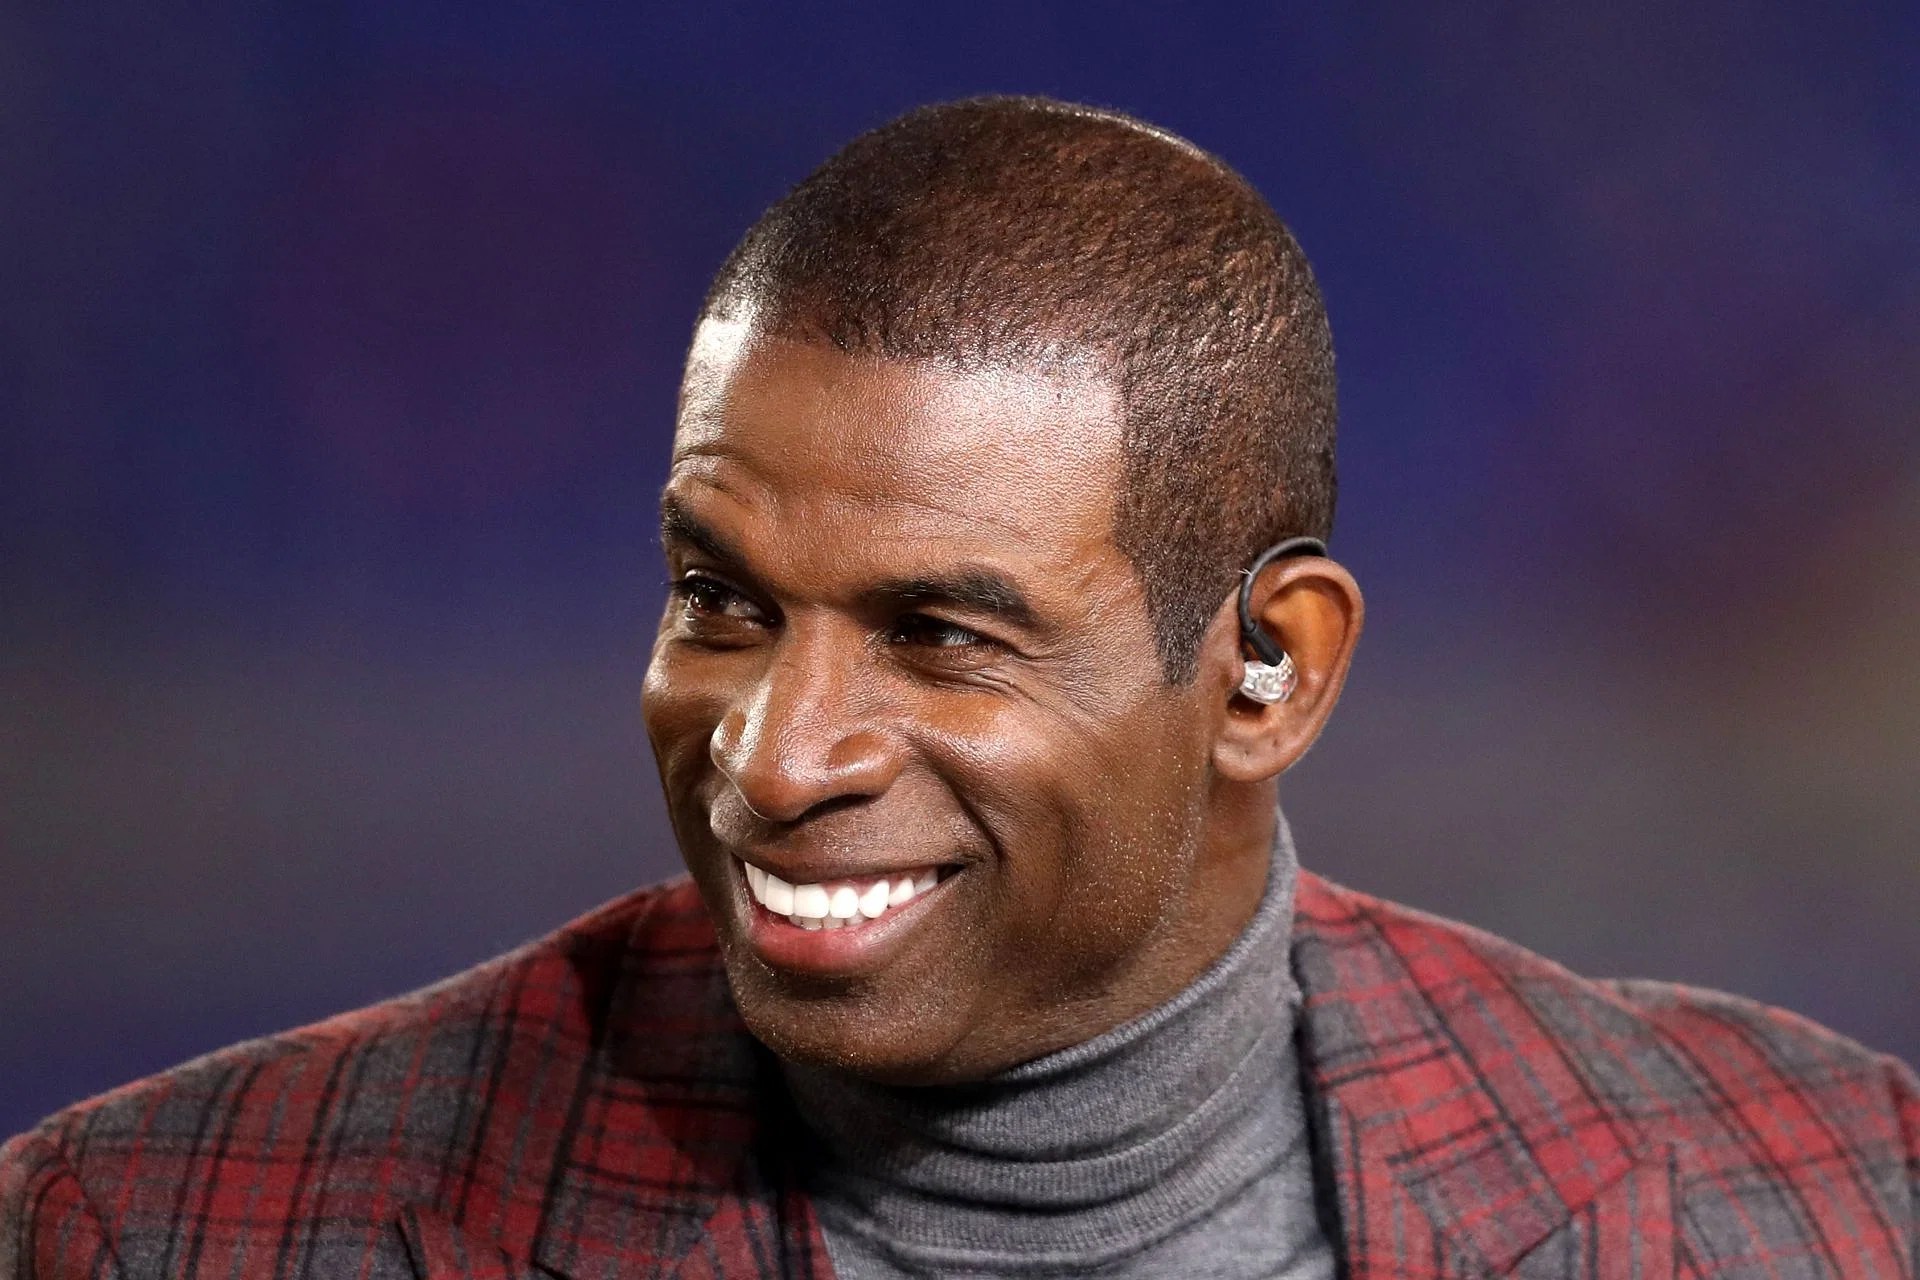 How many sons does Deion Sanders have?